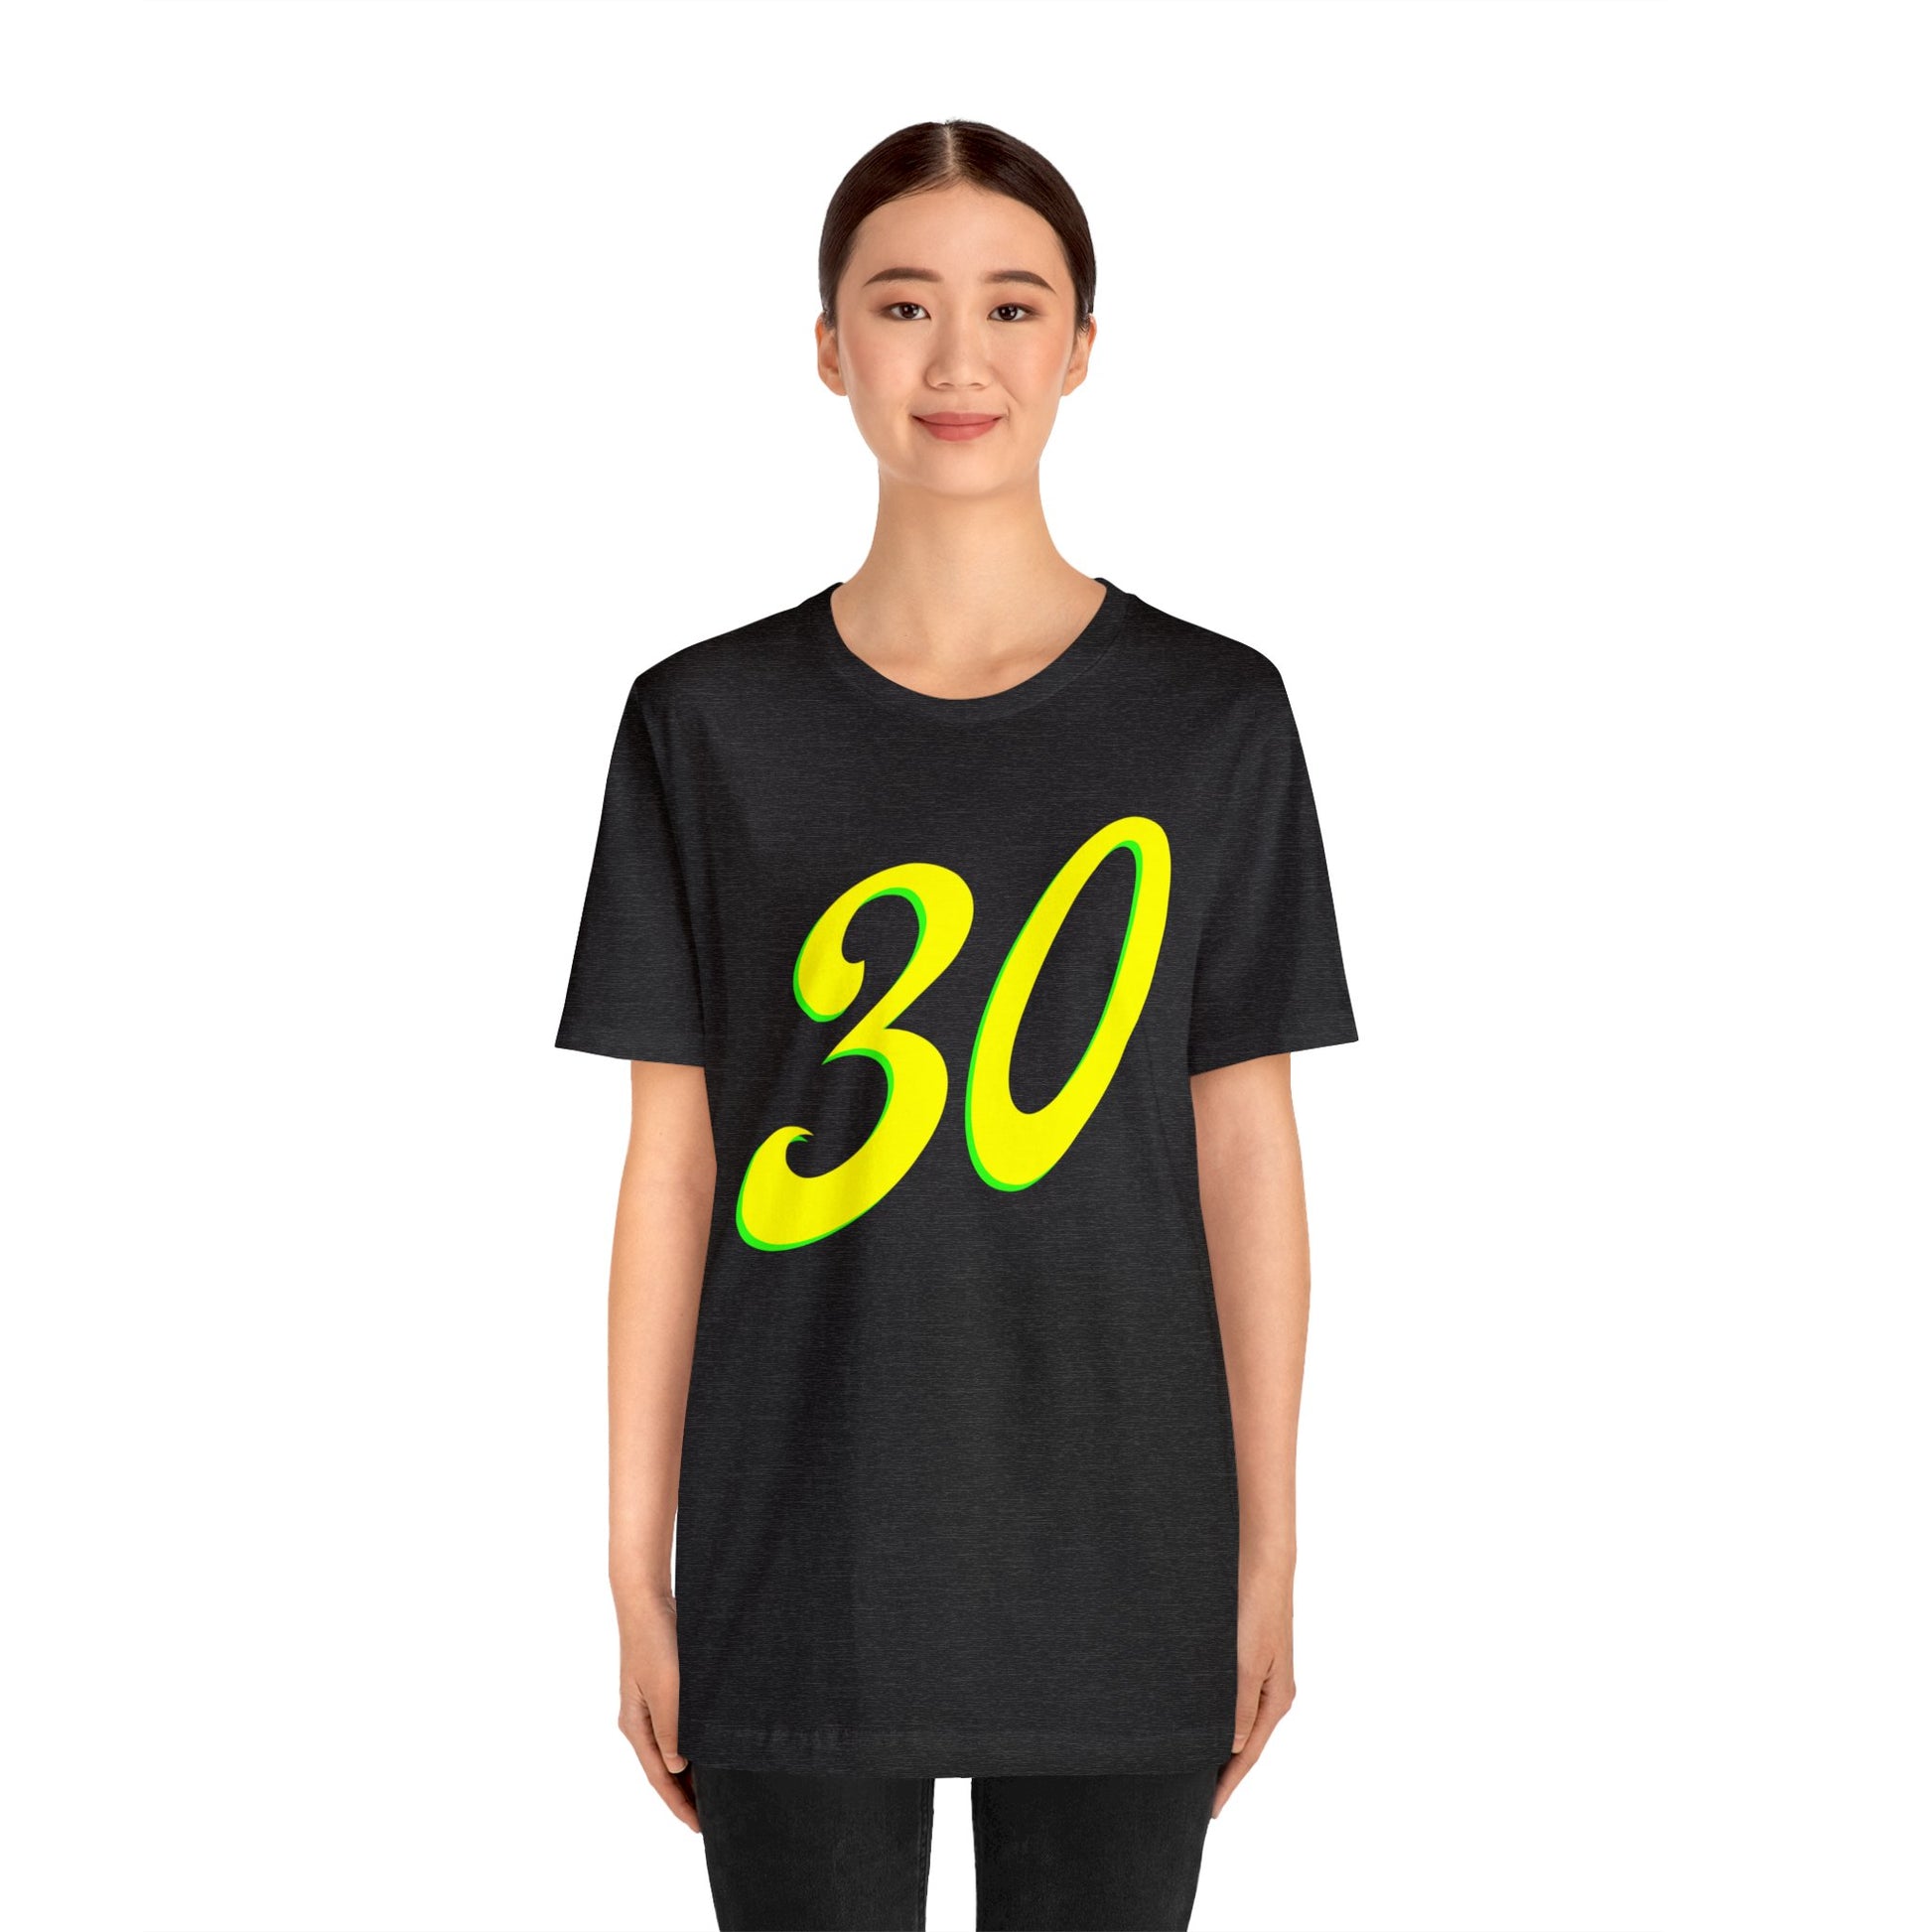 Number 30 Design - Soft Cotton Tee for birthdays and celebrations, Gift for friends and family, Multiple Options by clothezy.com in Asphalt Size Medium - Buy Now